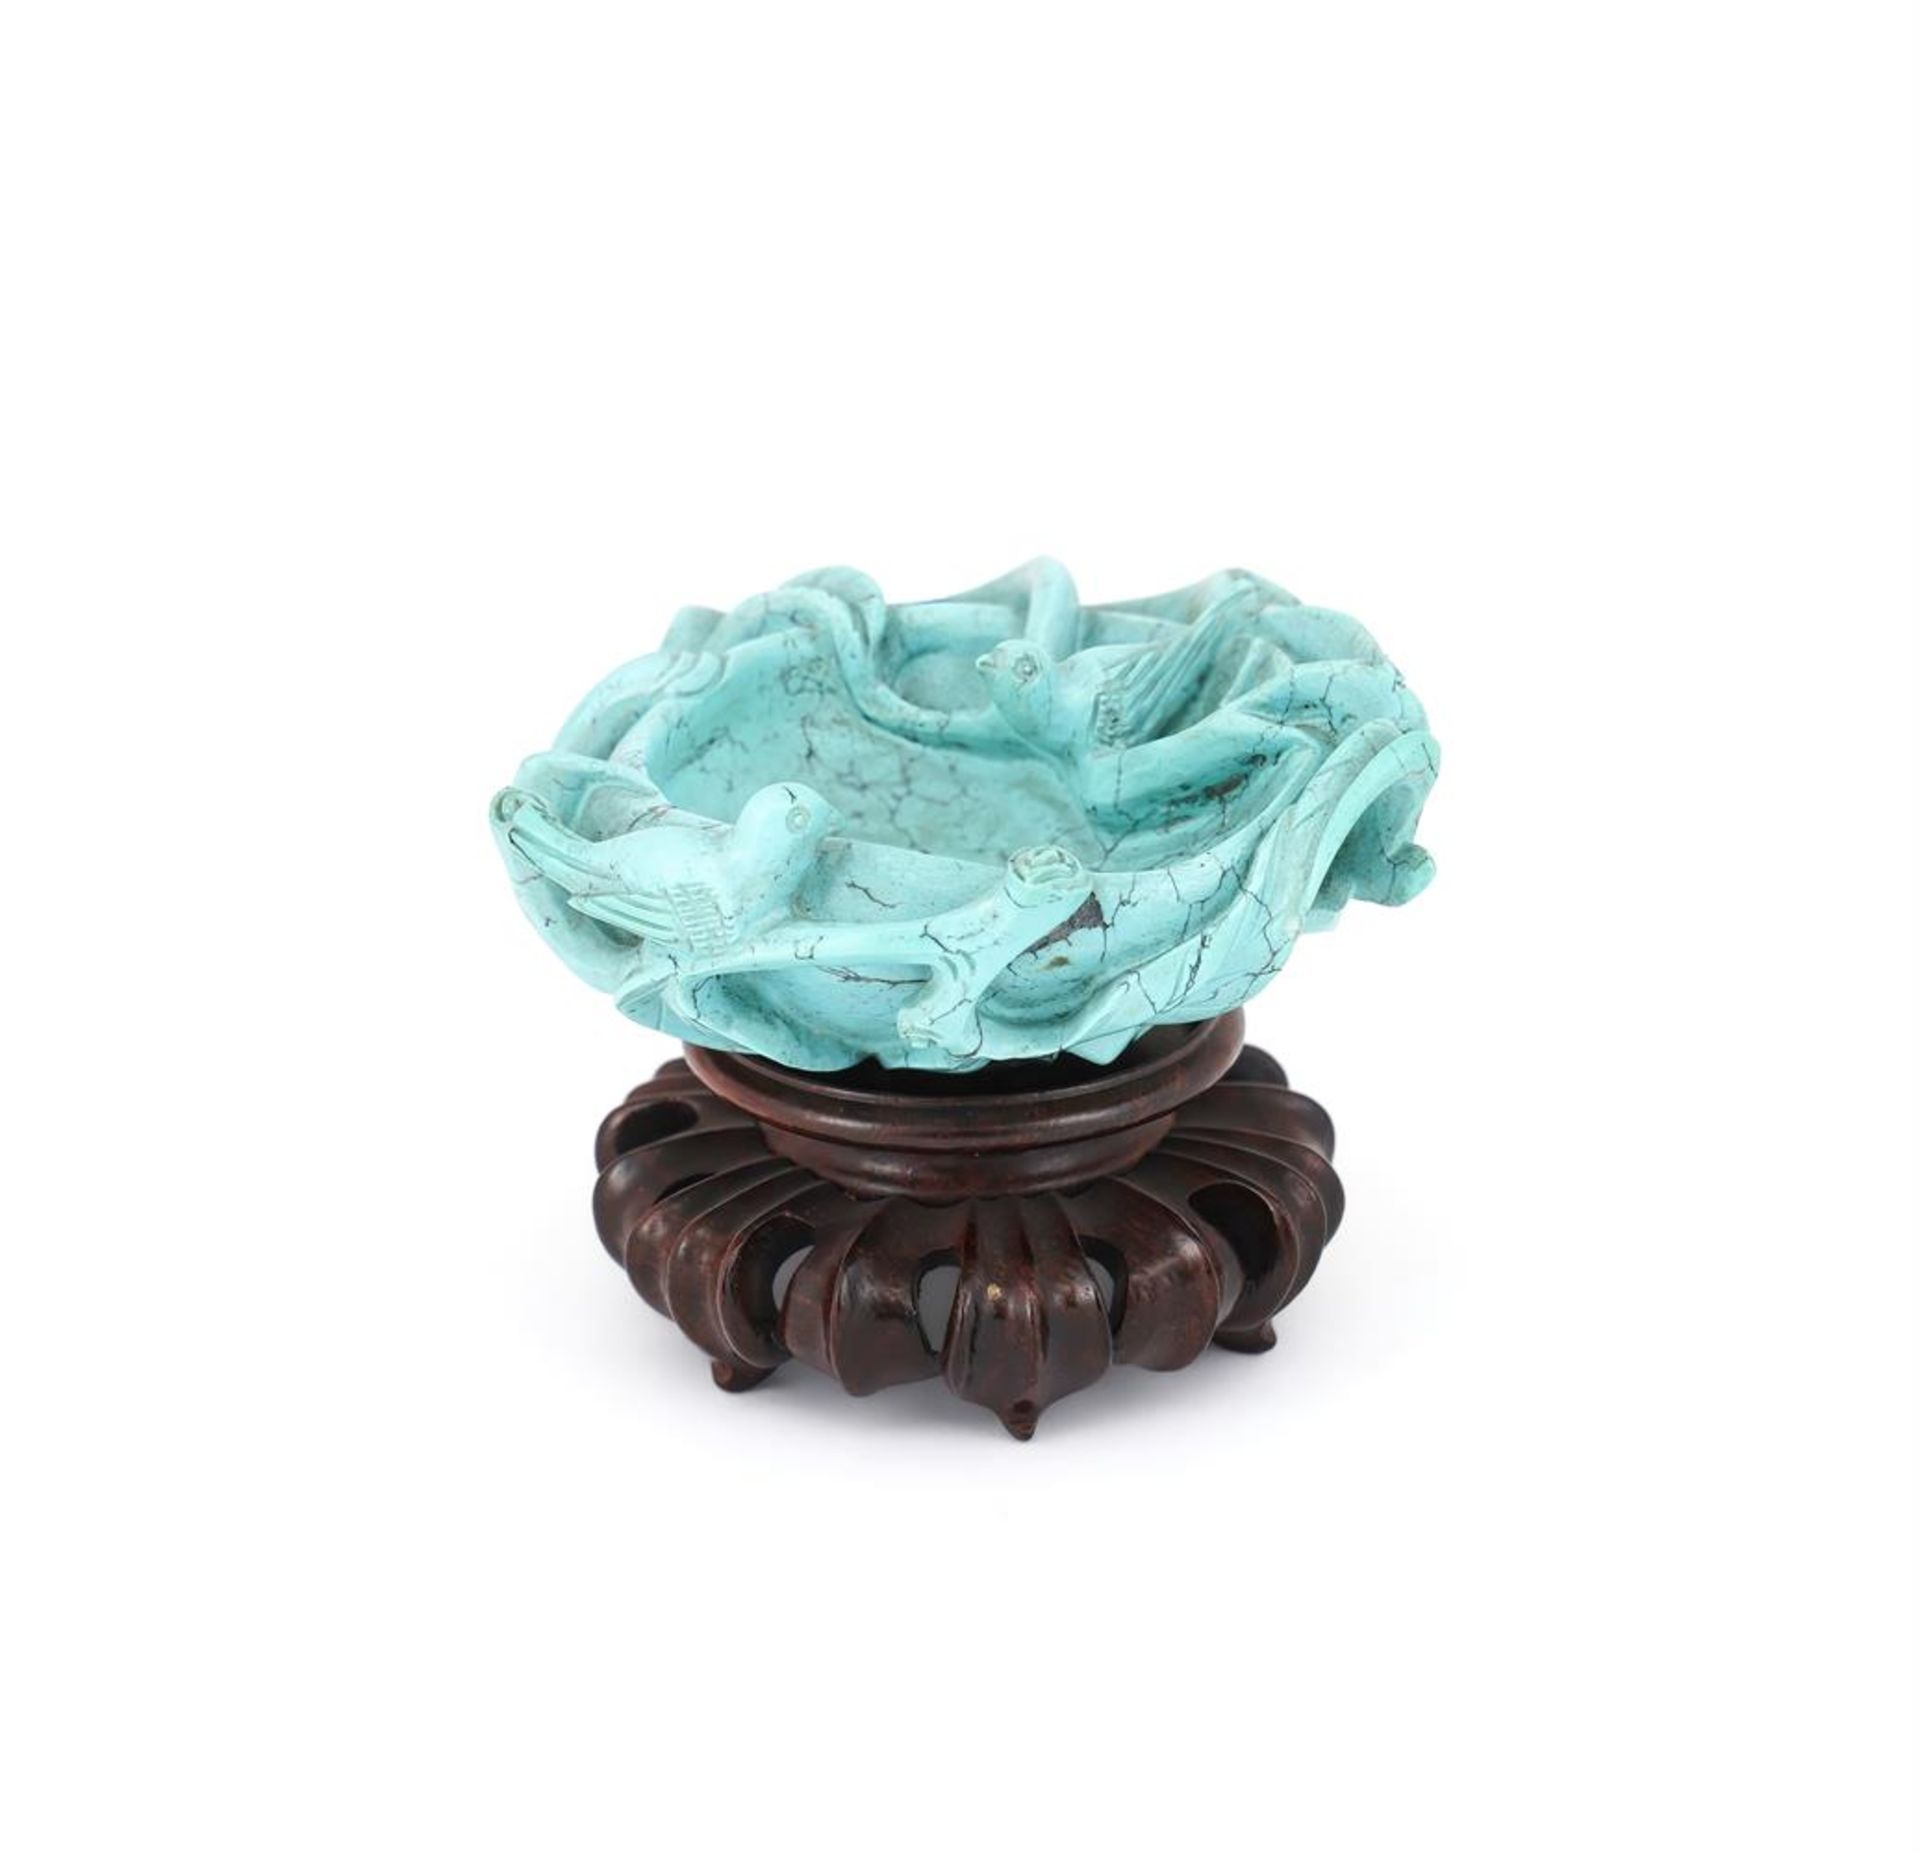 A CHINESE TURQUOISE SMALL 'BIRDS AND NEST' BOWL, QING DYNASTY